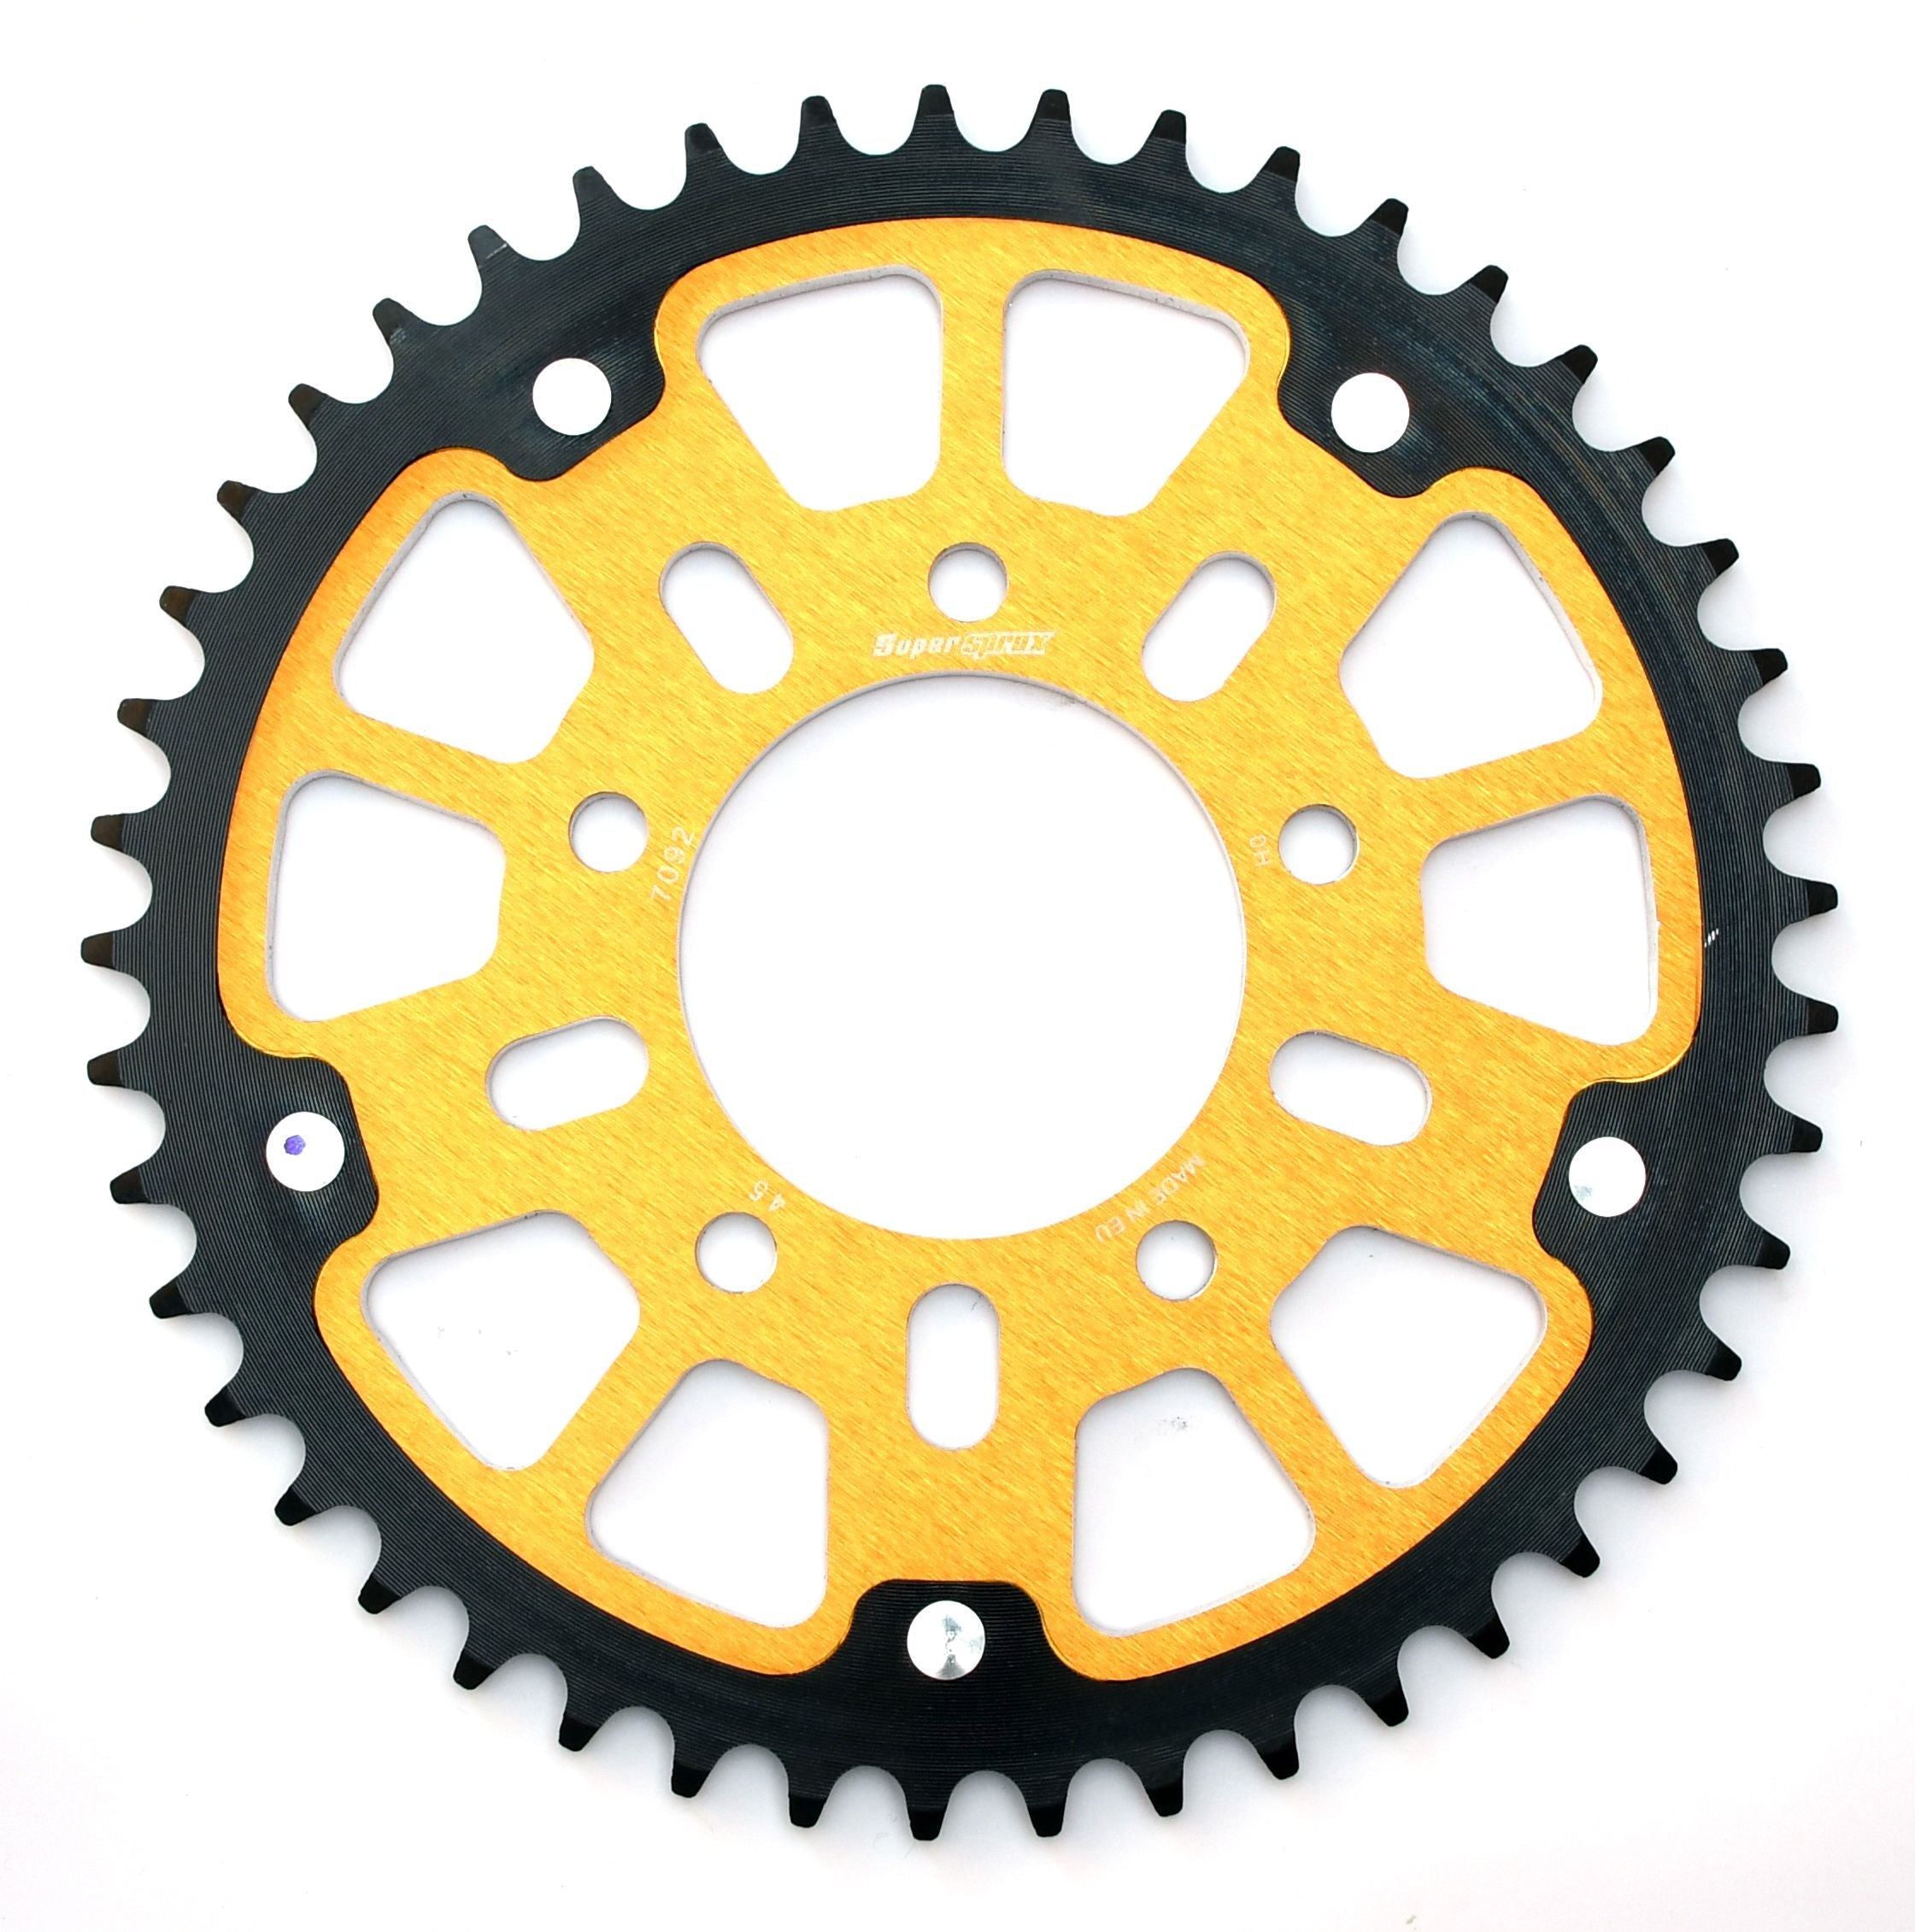 Supersprox Stealth 525 Pitch Rear Sprocket RST-7092:46 - (525, 76mm Centre, 100mm PCD)